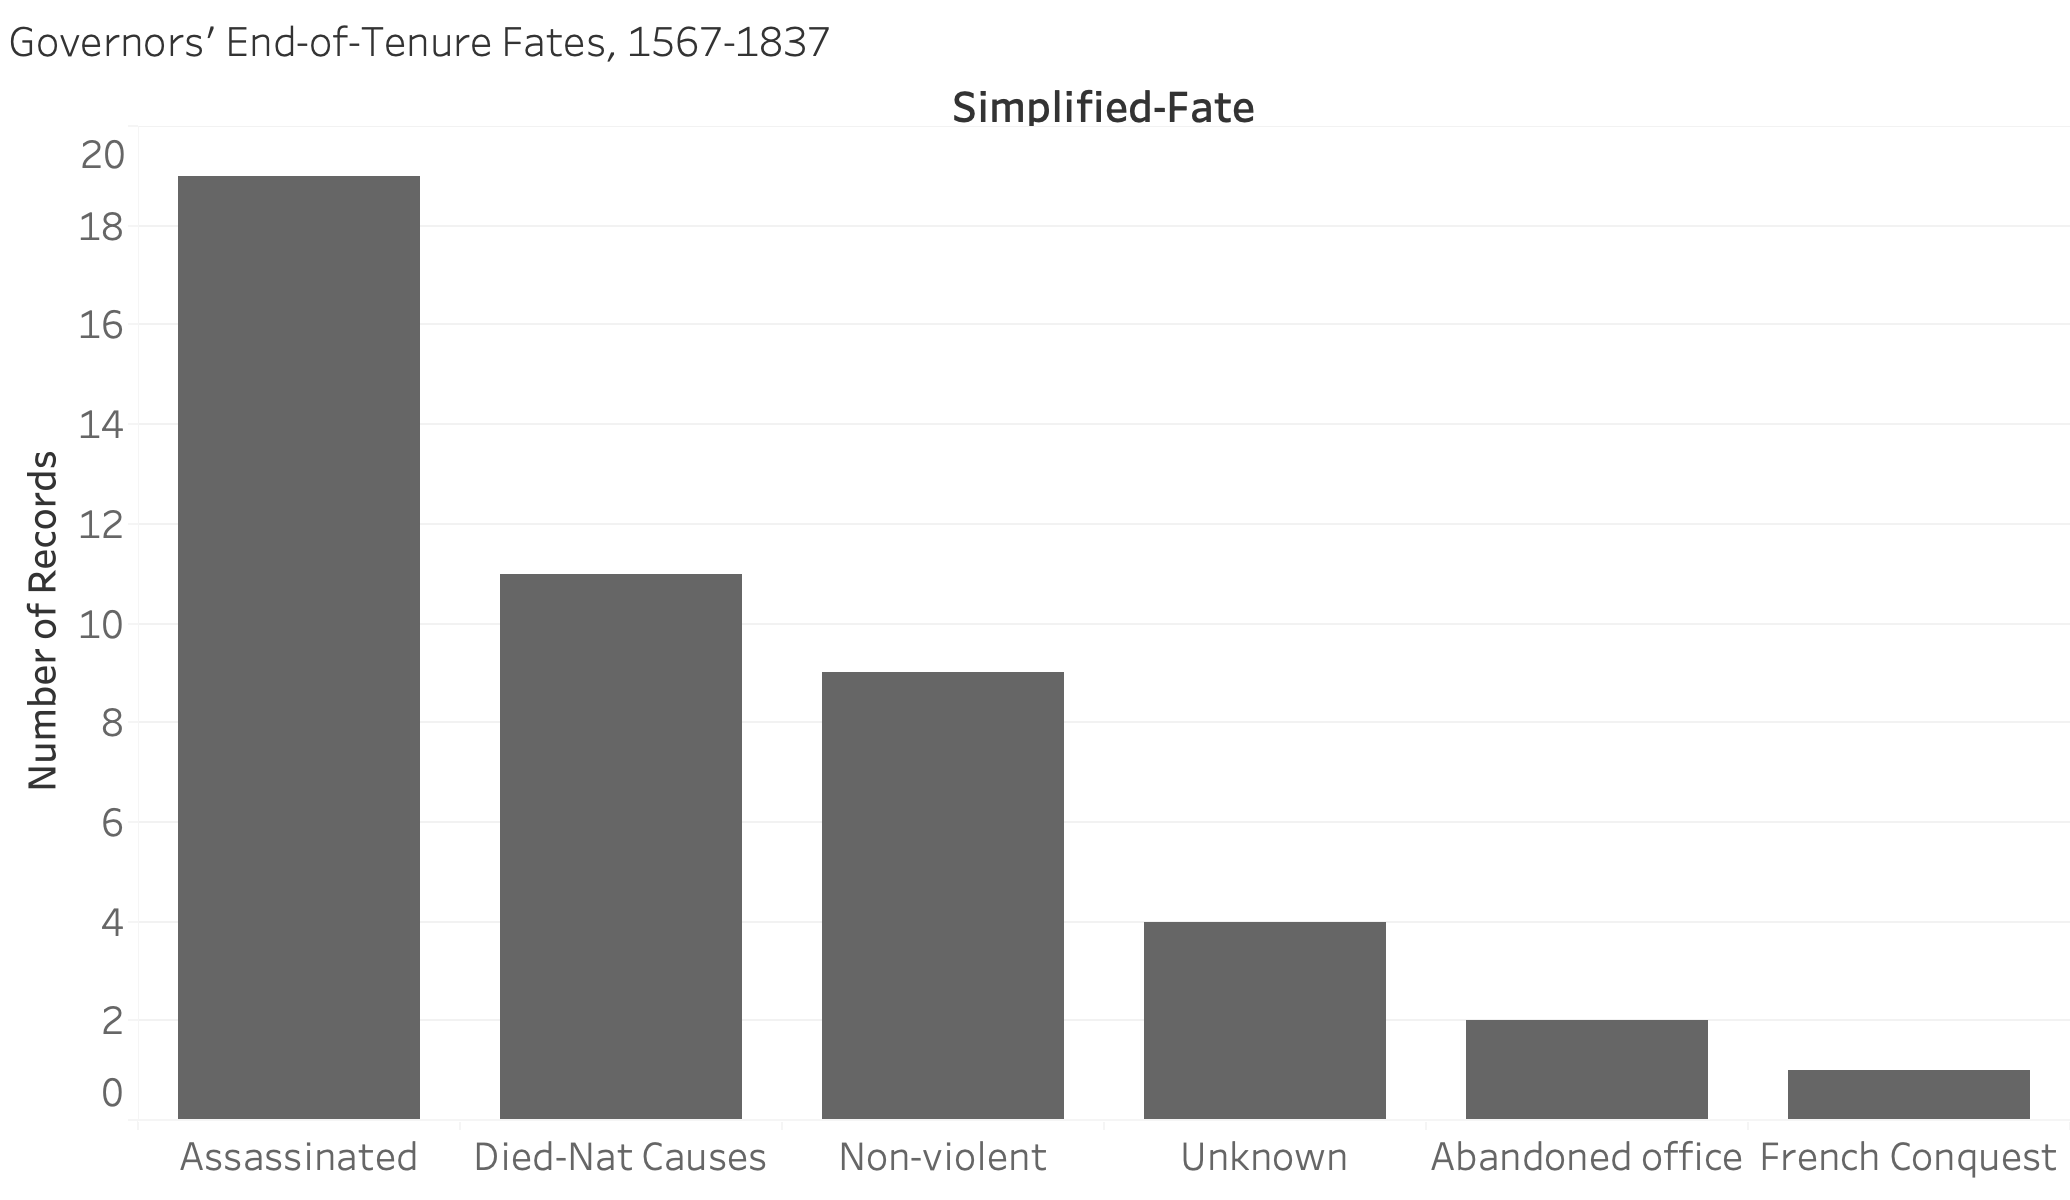 Bar chart showing that most governors were assassinated or exiled from Constantine, Algeria, 1567-1837.